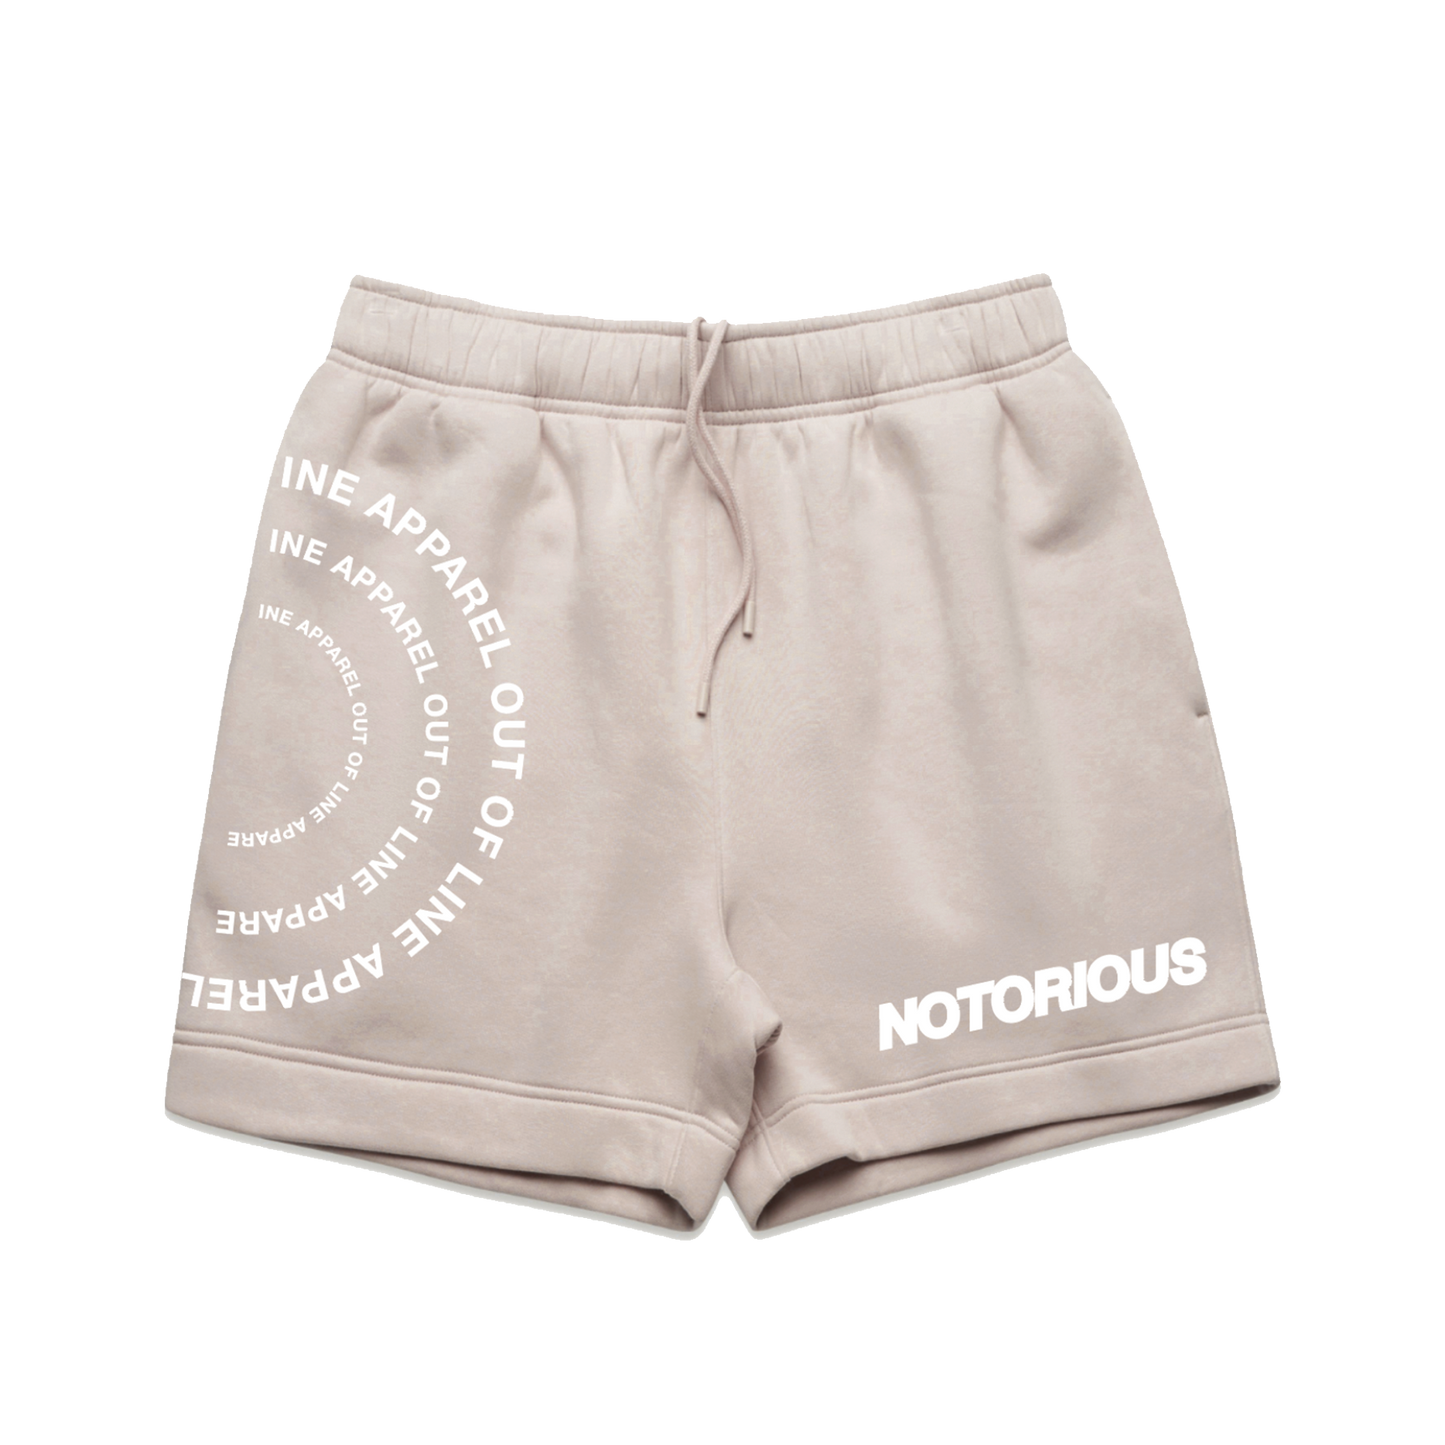 BONE NOTORIOUS X OUT OF LINE APPAREL COLLAB SWEATSHORTS